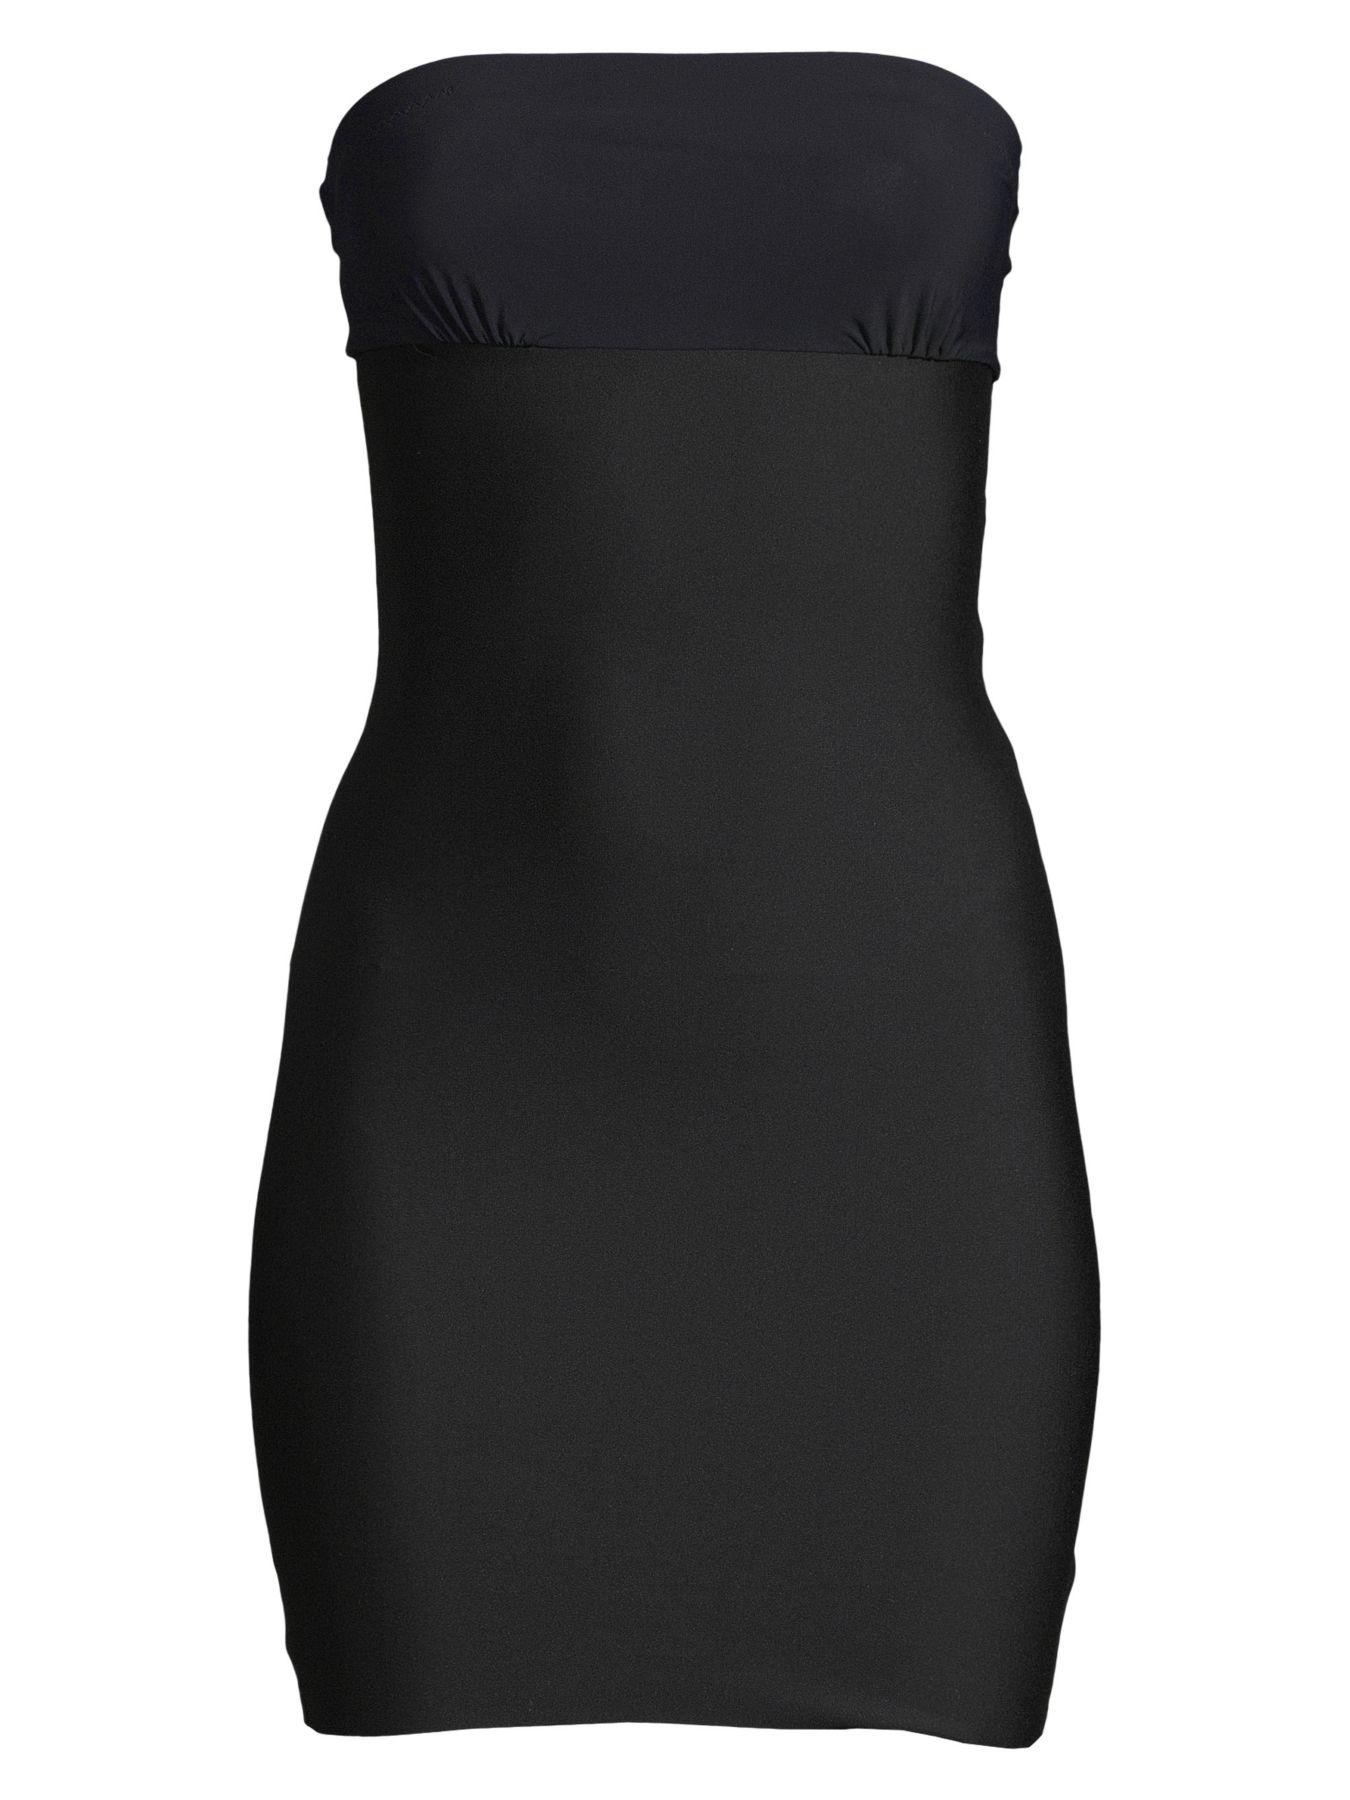 Commando Synthetic Two-faced Tech Strapless Slip Dress in Black - Lyst